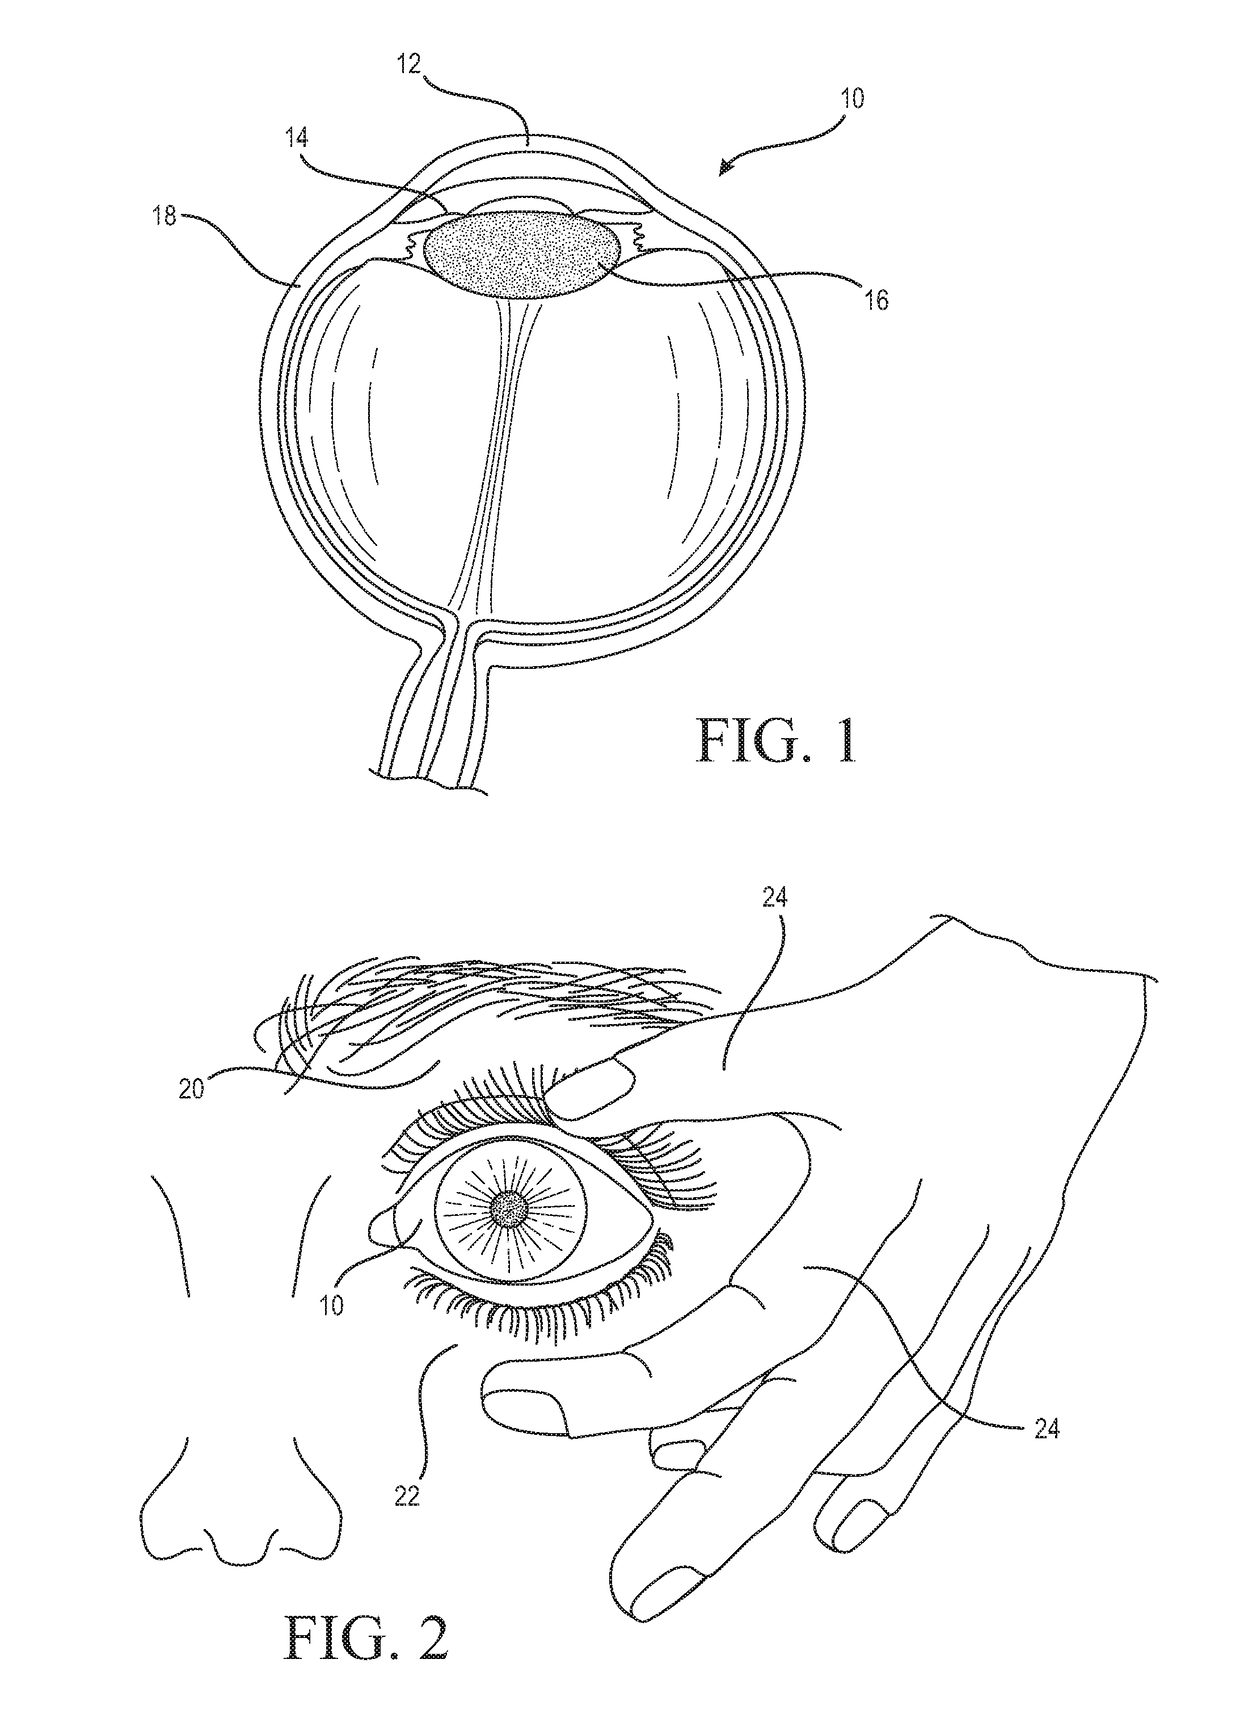 System and method for the delivery of medications or fluids to the eye